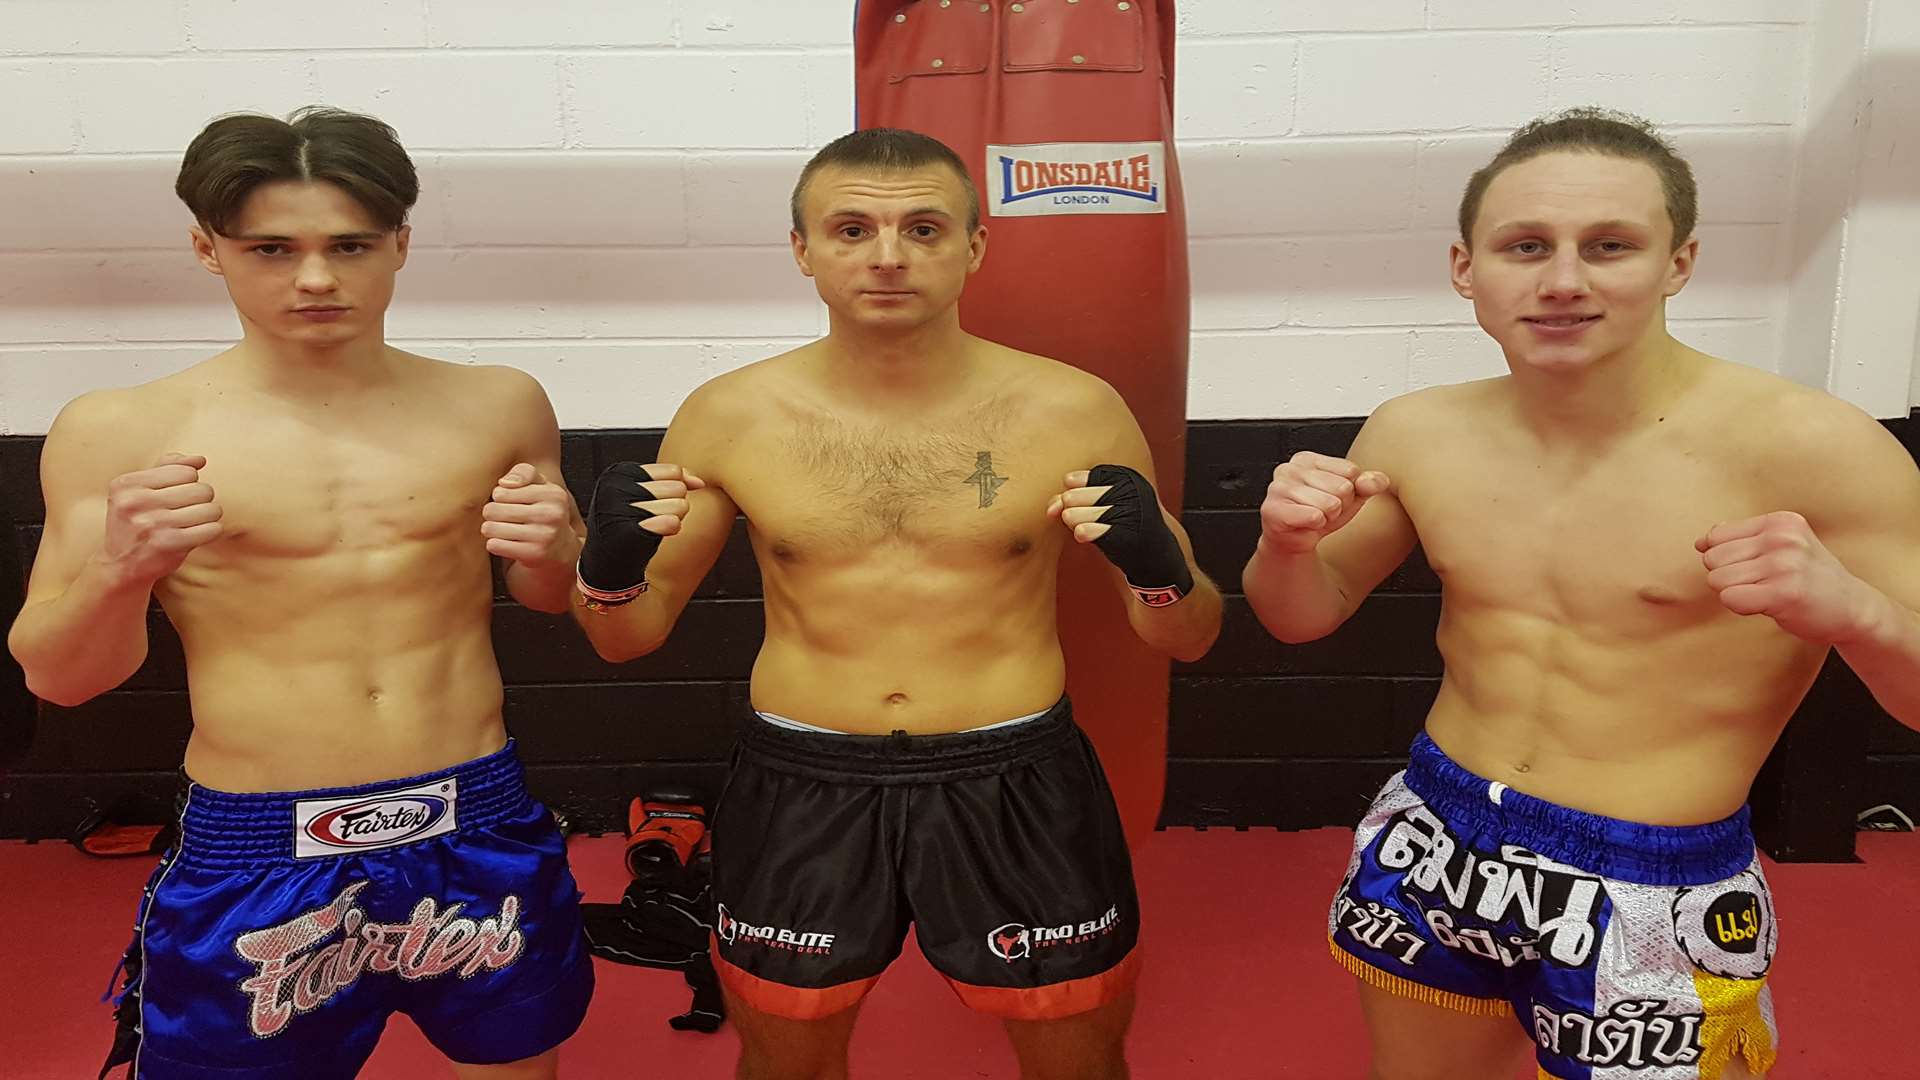 Medway kickboxers Chayden Carpenter, Rytis Vilionis and Connor George heading to France.